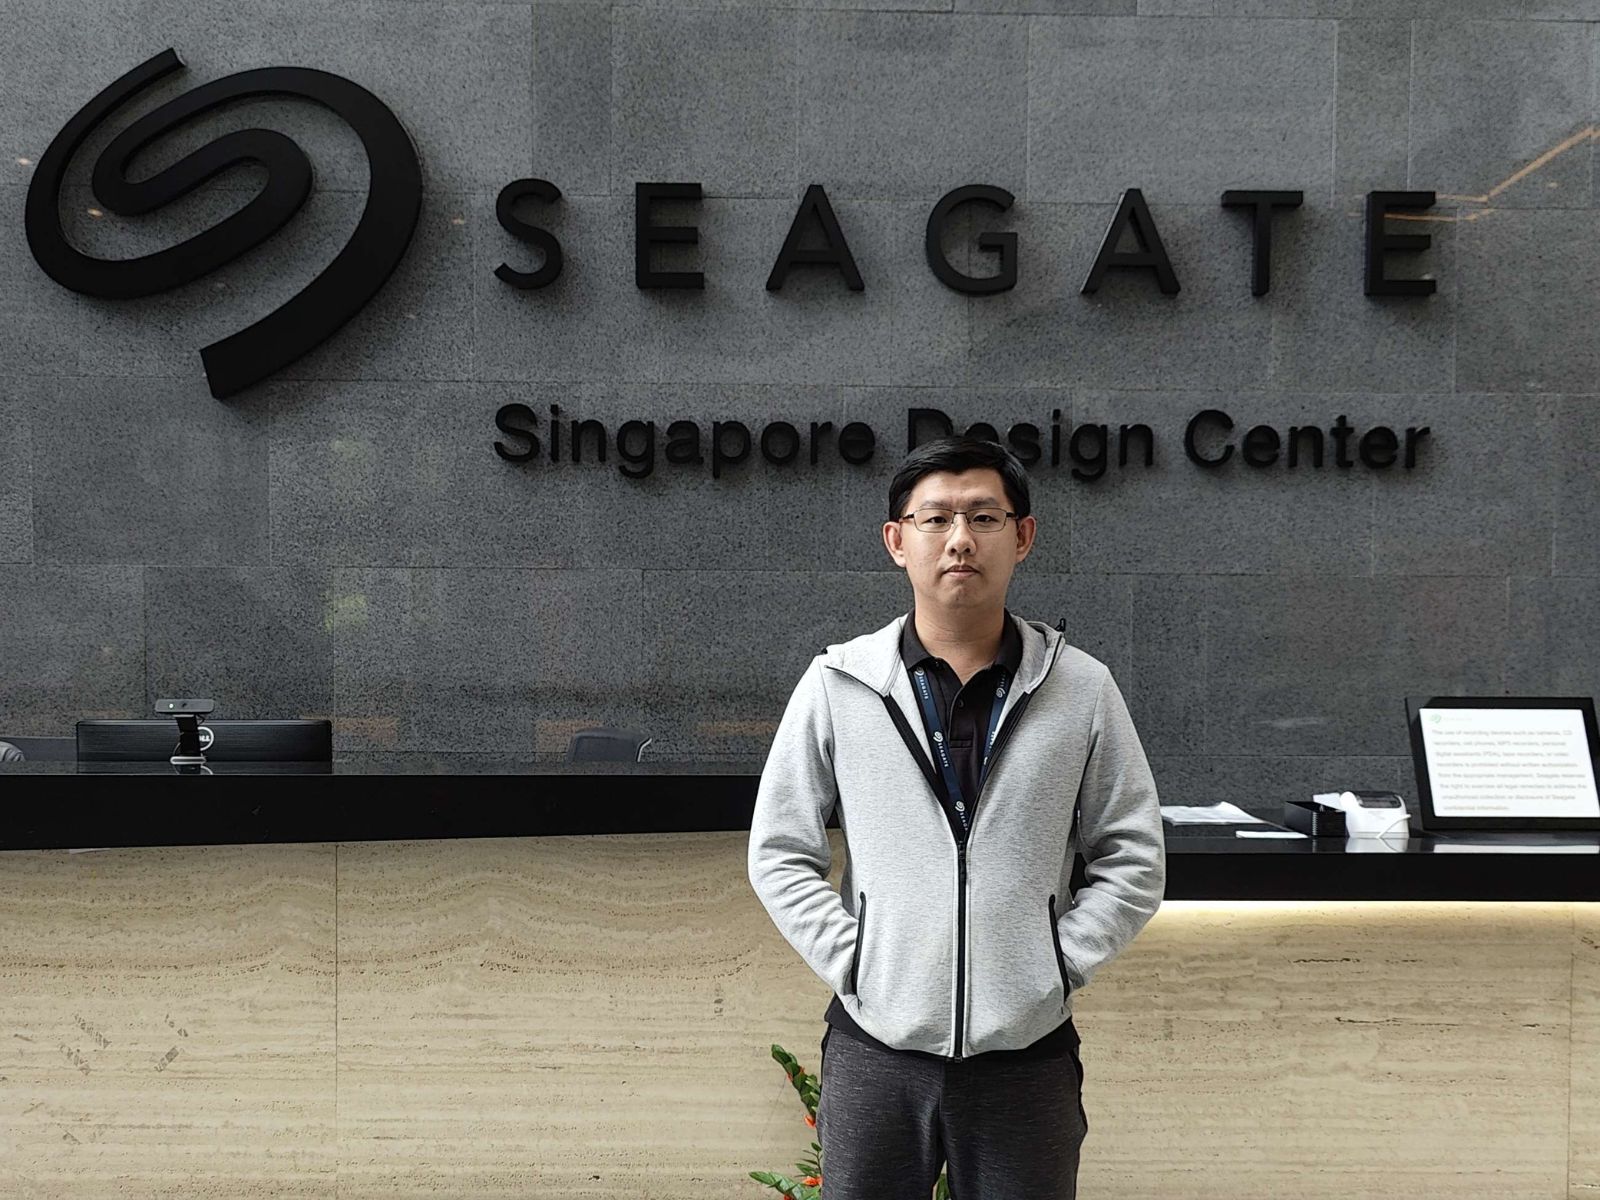 DigiPen Graduate Toh Yu Xing stands in a building's lobby with the SEAGATE logo behind him